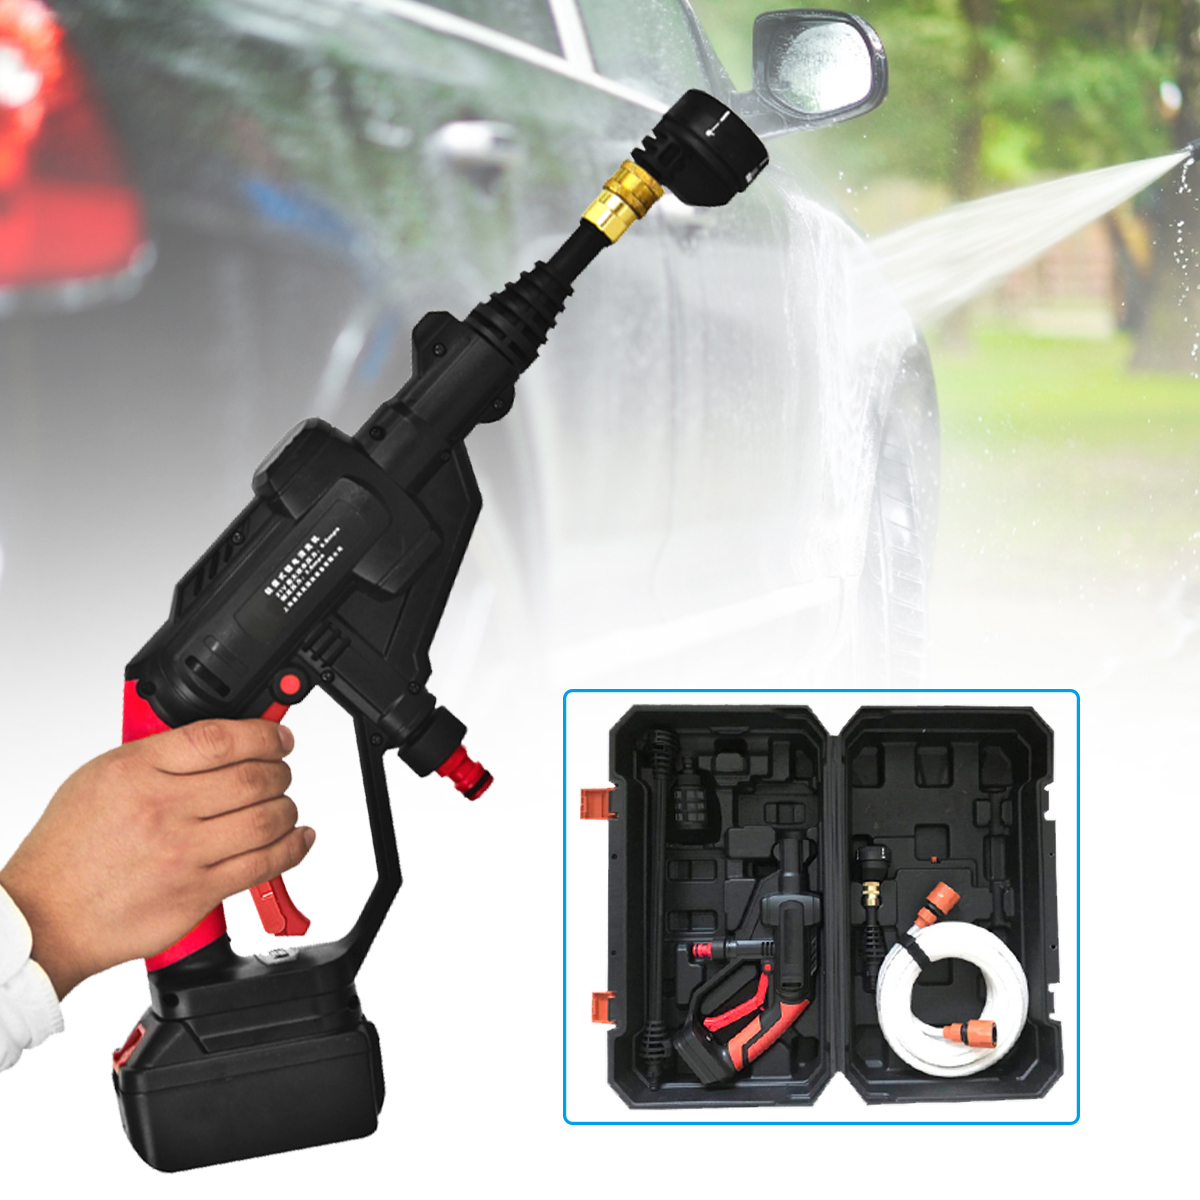 21V-20Ah-Multifunctional-Cordless-Pressure-Cleaner-Washer-Sprayer-Water-Hose-Nozzle-Pump-with-Batter-1292573-1